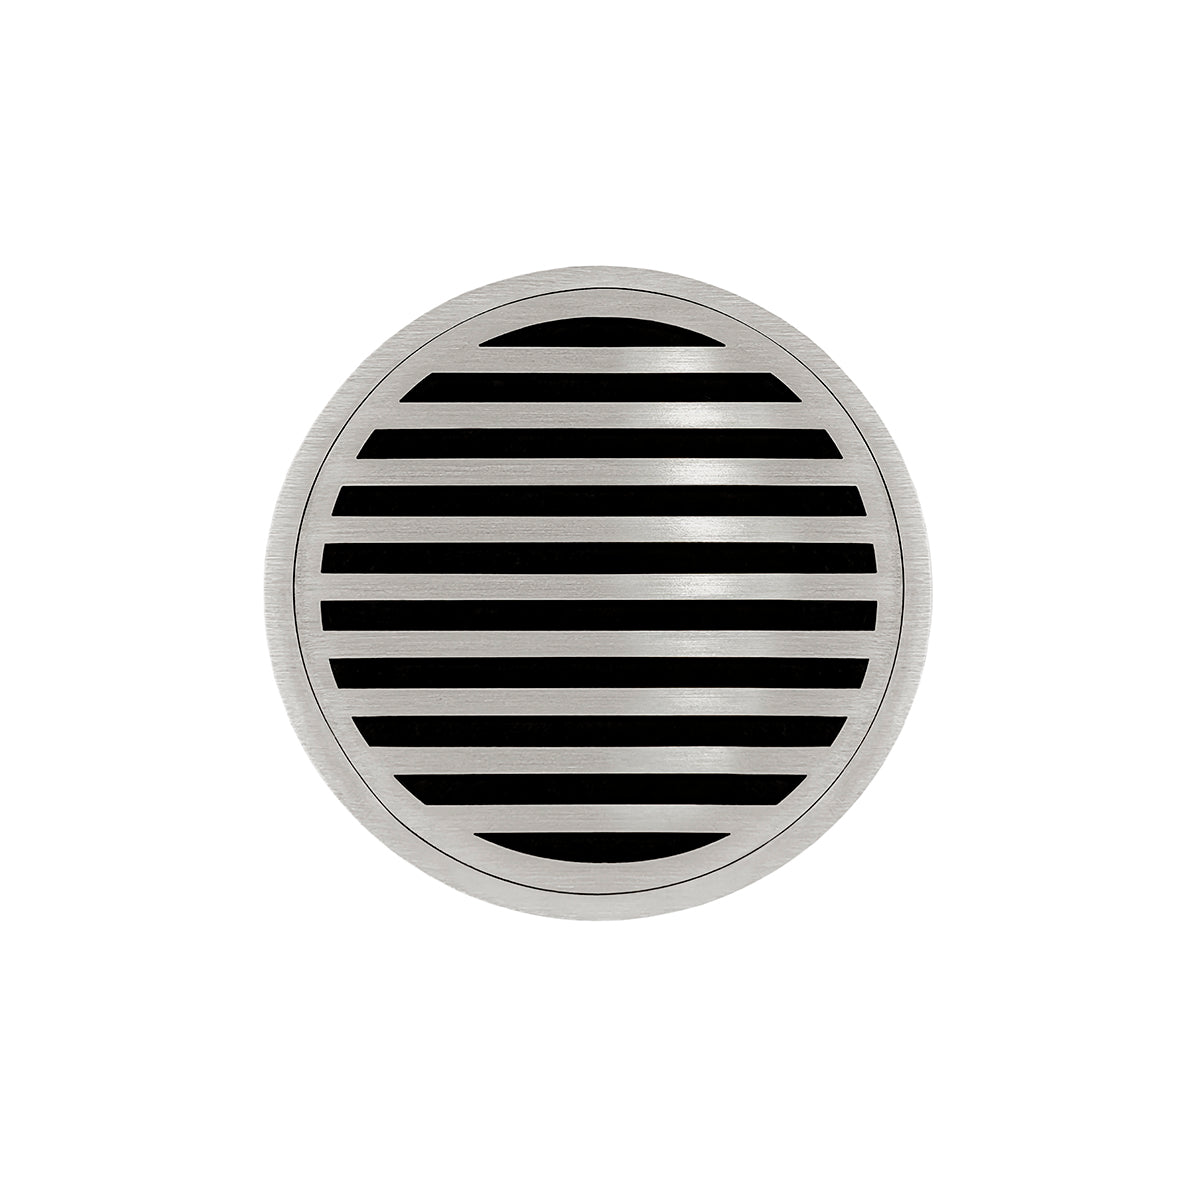 Infinity Drain 5" Round RND 5 Premium Center Drain Kit with Lines Pattern Decorative Plate with Cast Iron Drain Body for Hot Mop, 2" Outlet